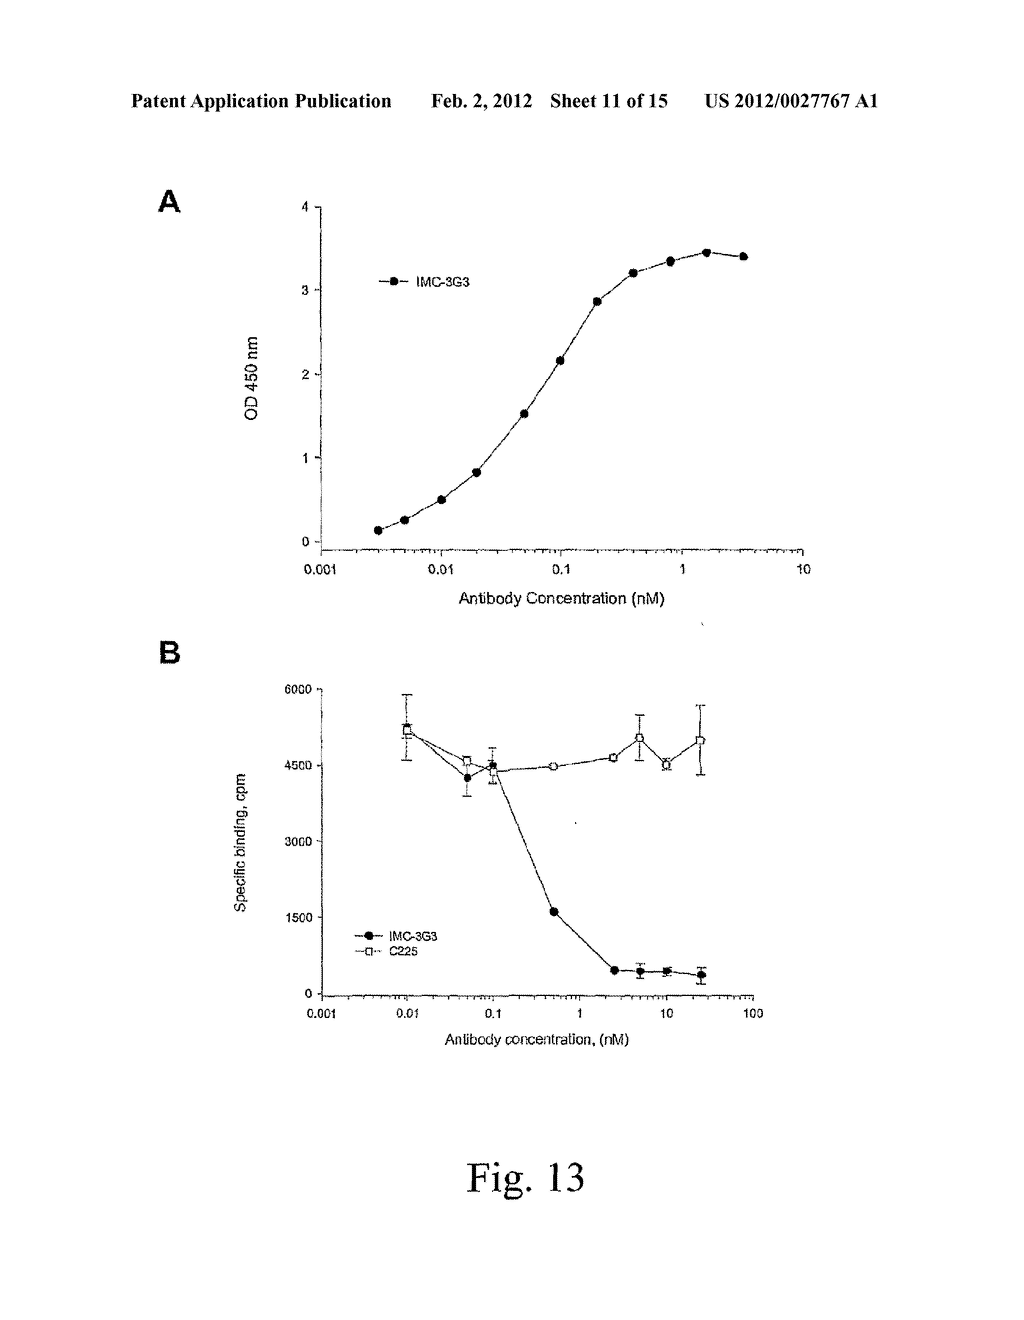 ANTIBODIES AGAINST PDGFR ALPHA TO INHIBIT TUMOR GROWTH - diagram, schematic, and image 12